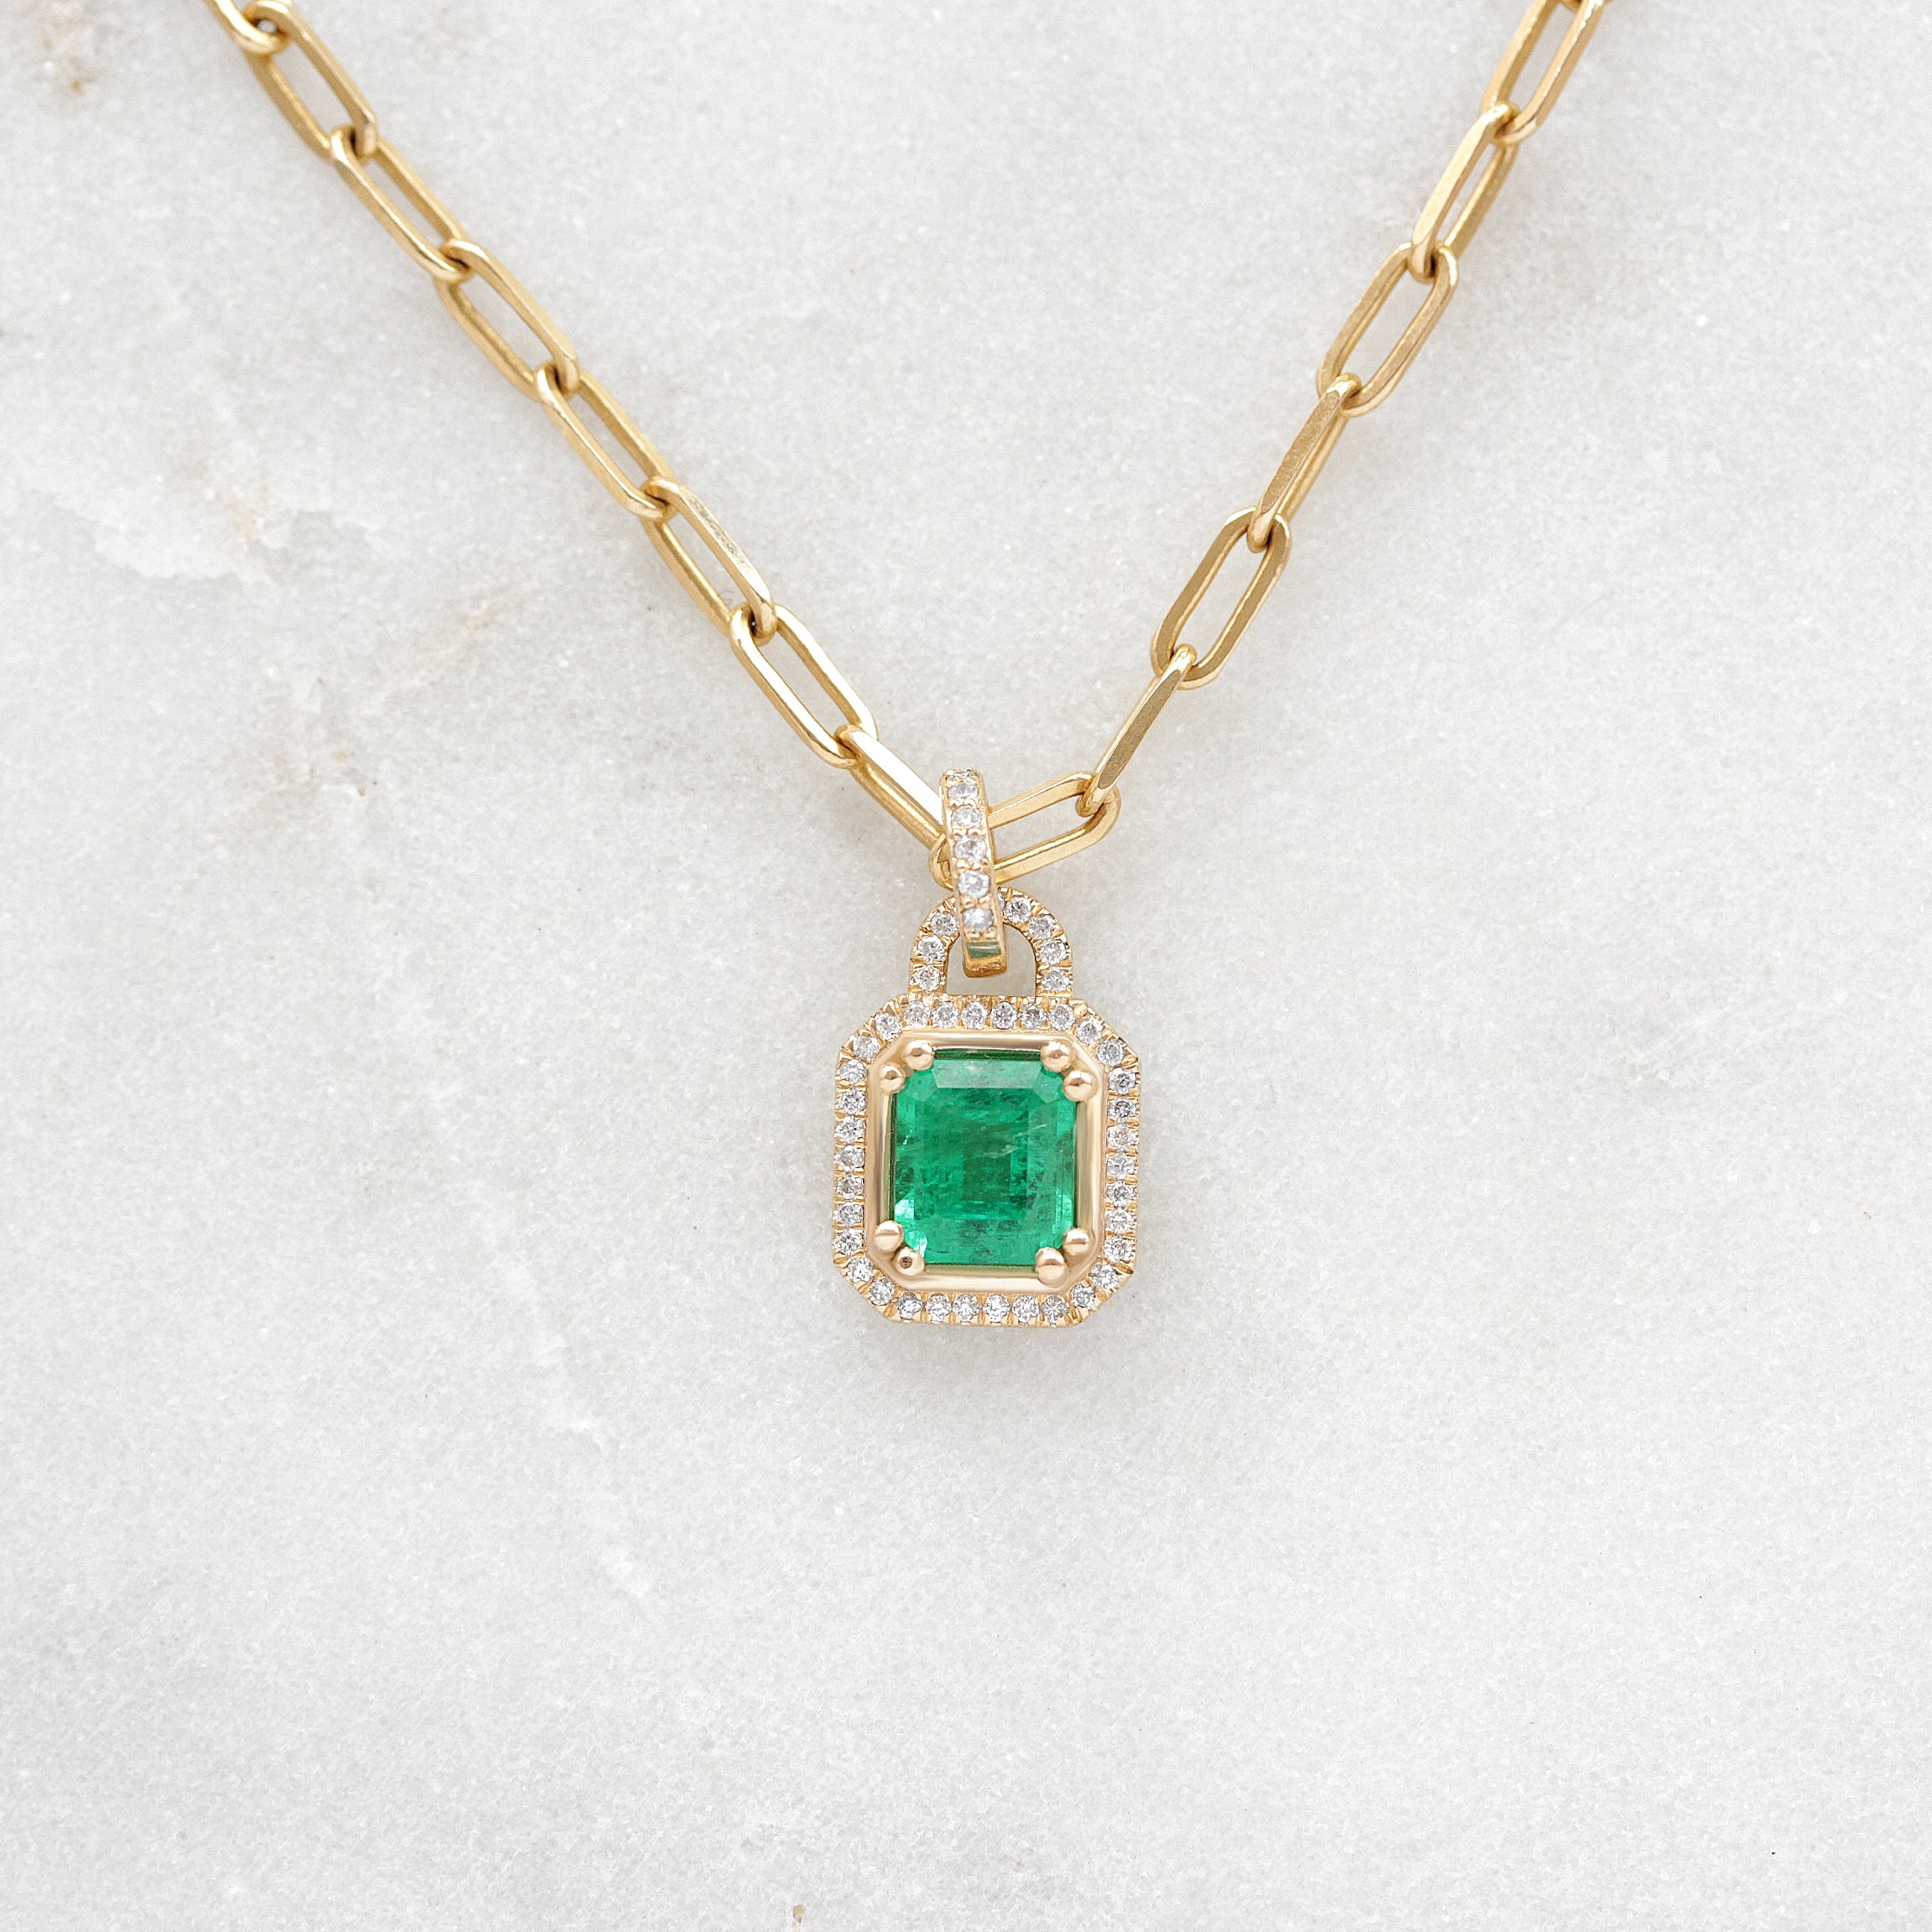 Emerald and Diamonds Lock Paperclip Necklace